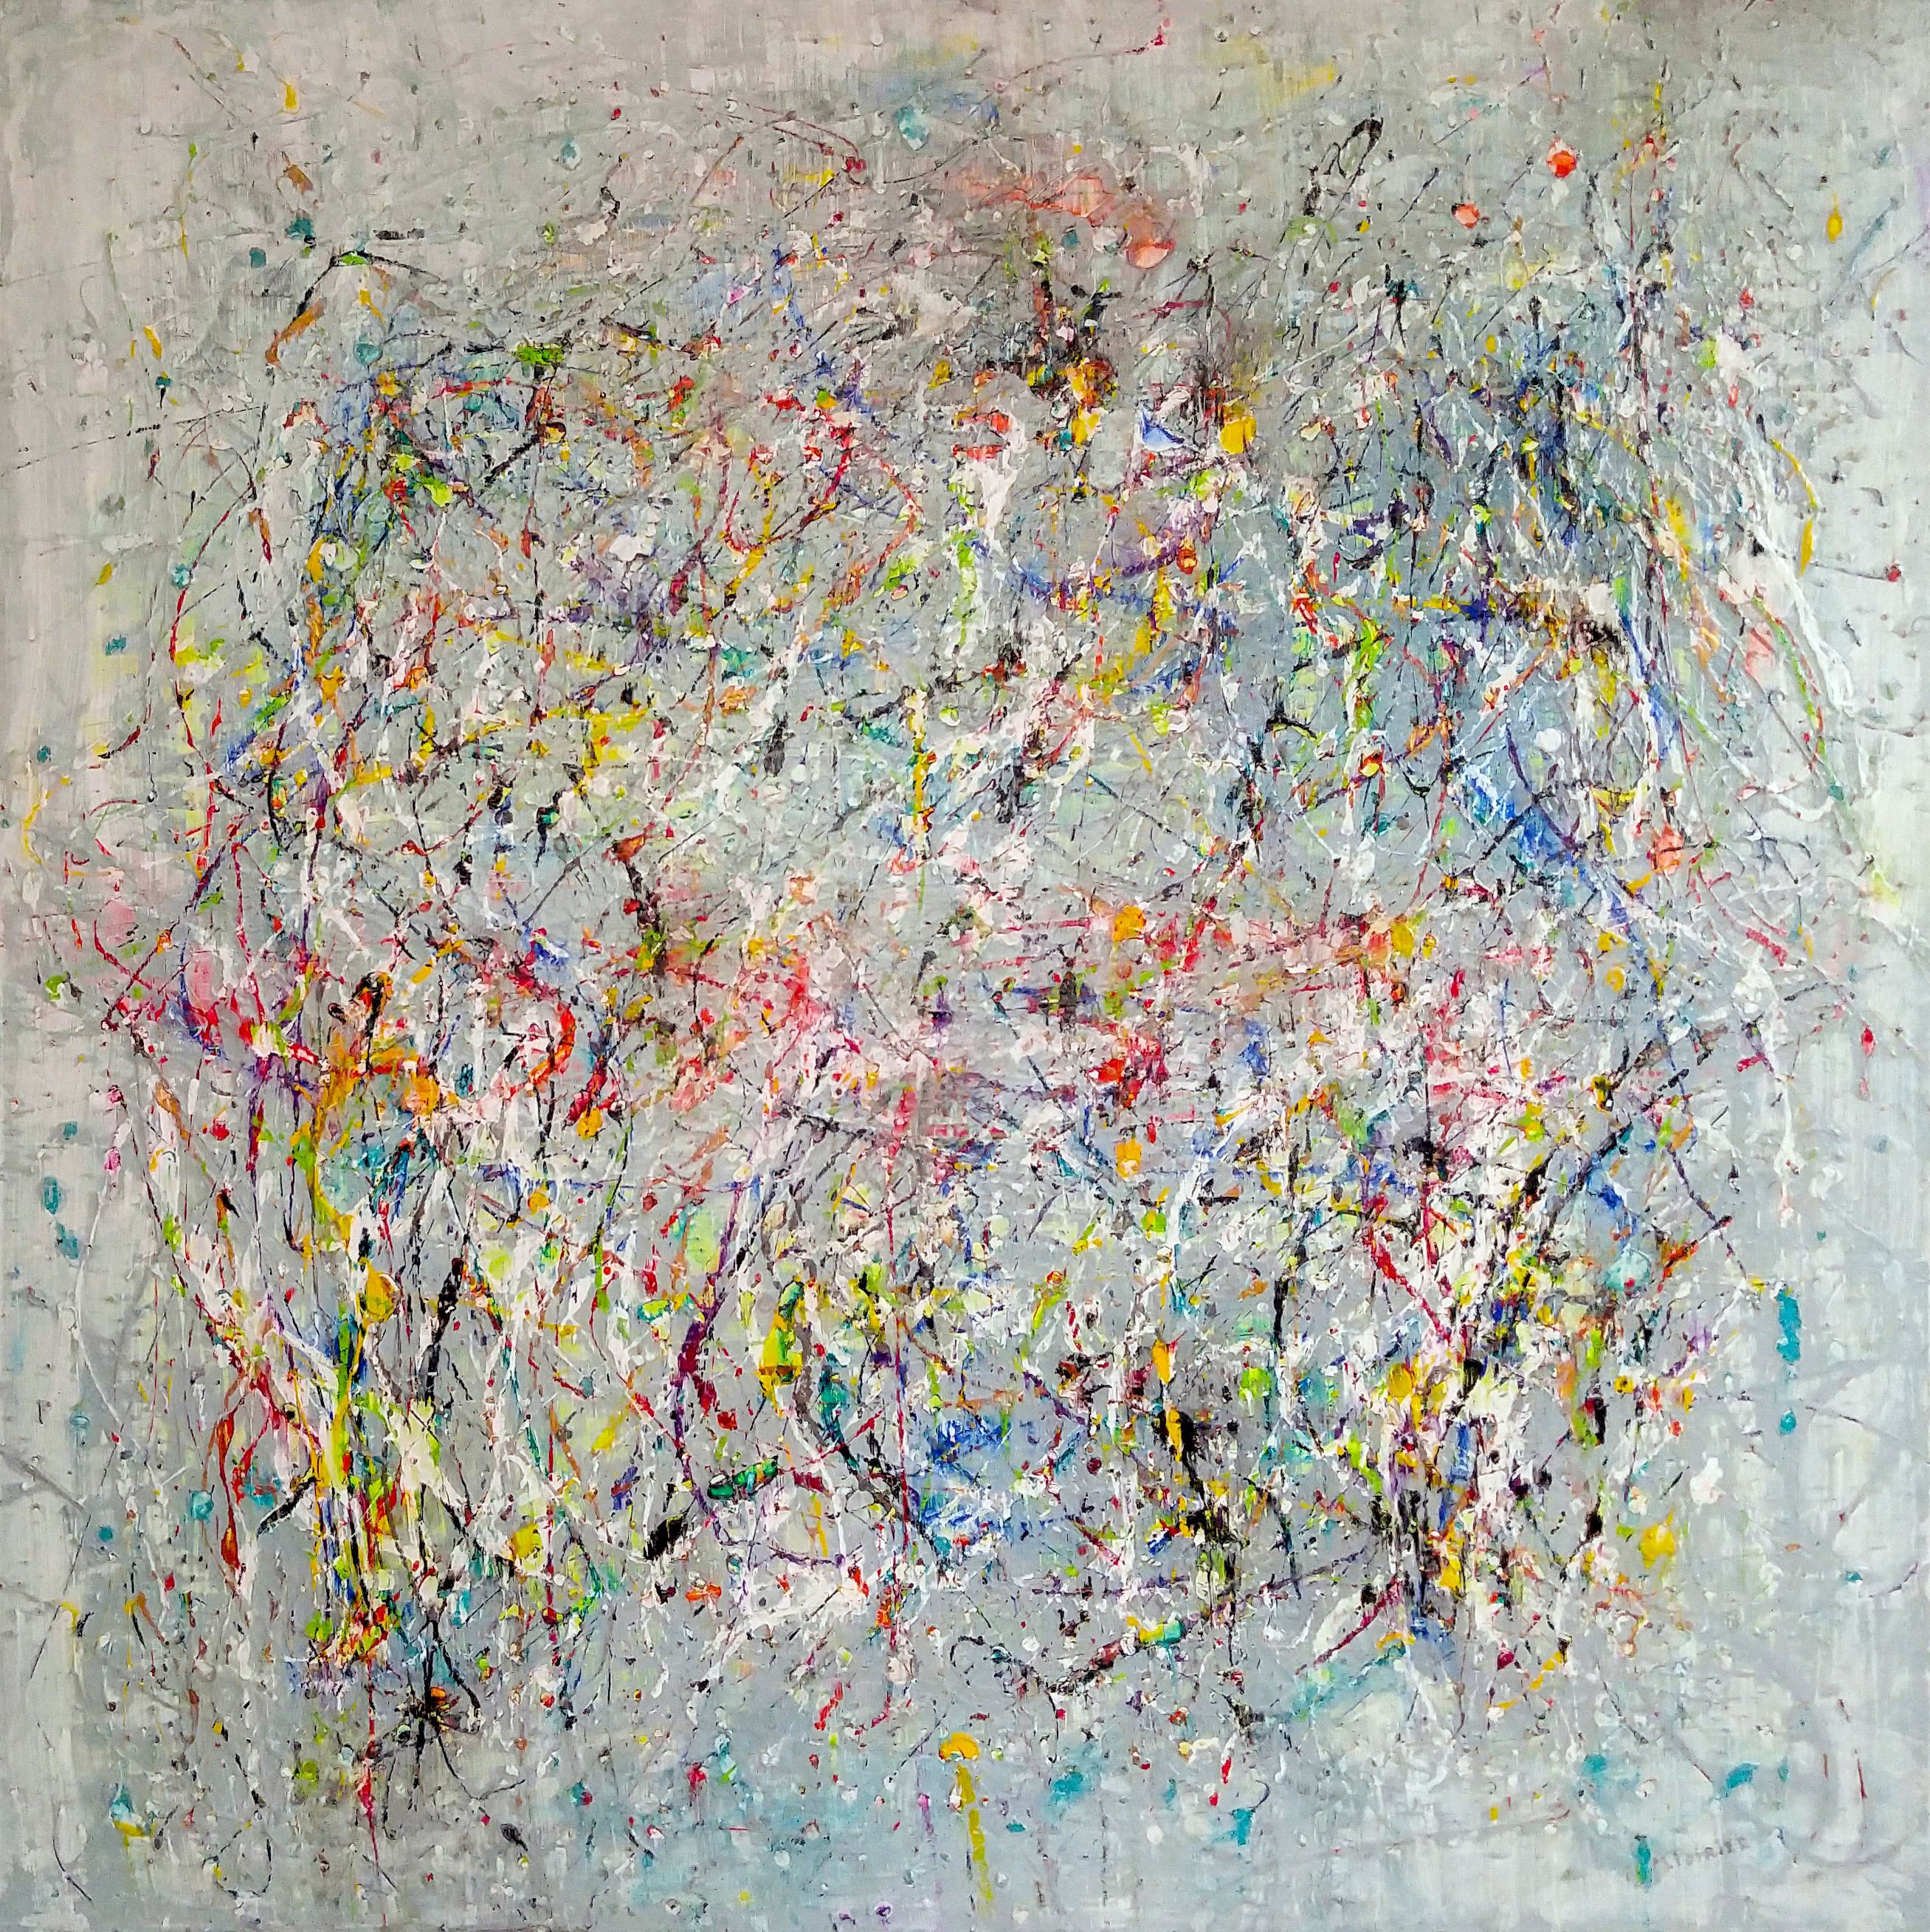 EXPLORATION
48x48 inches,122x122 centimeters SOLD)